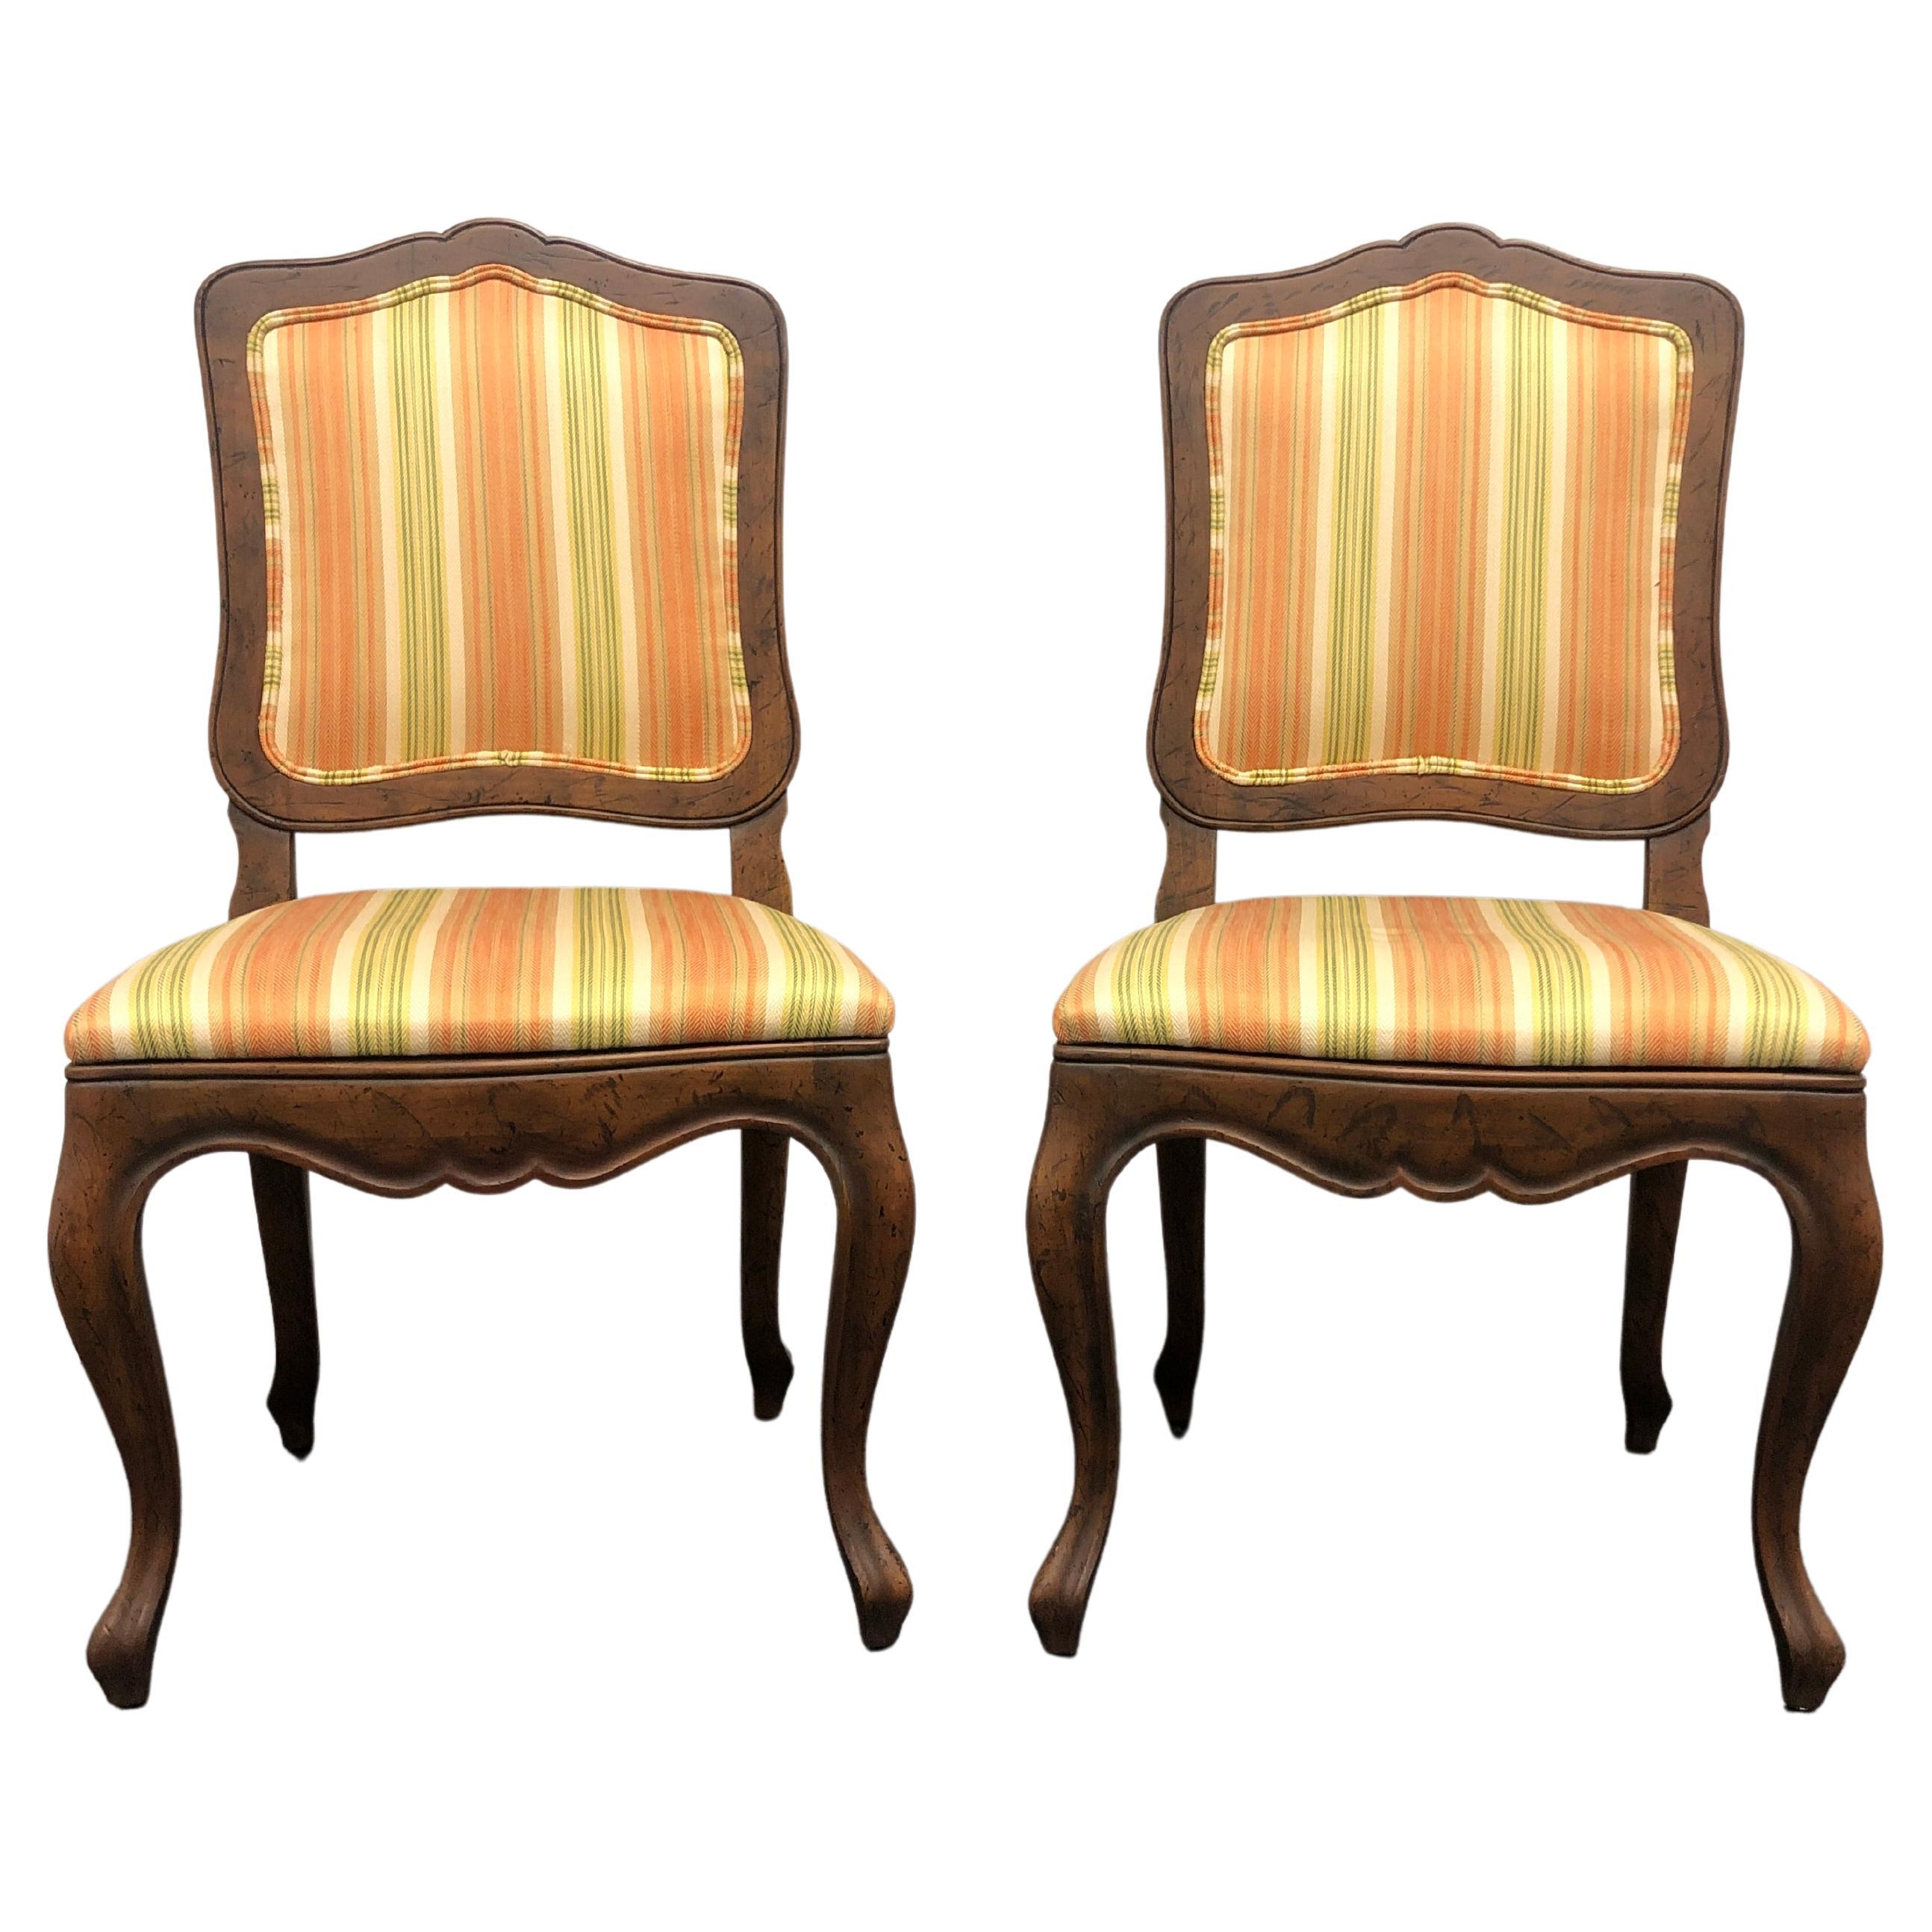 BAKER French Country Style Dining Side Chairs - Pair D